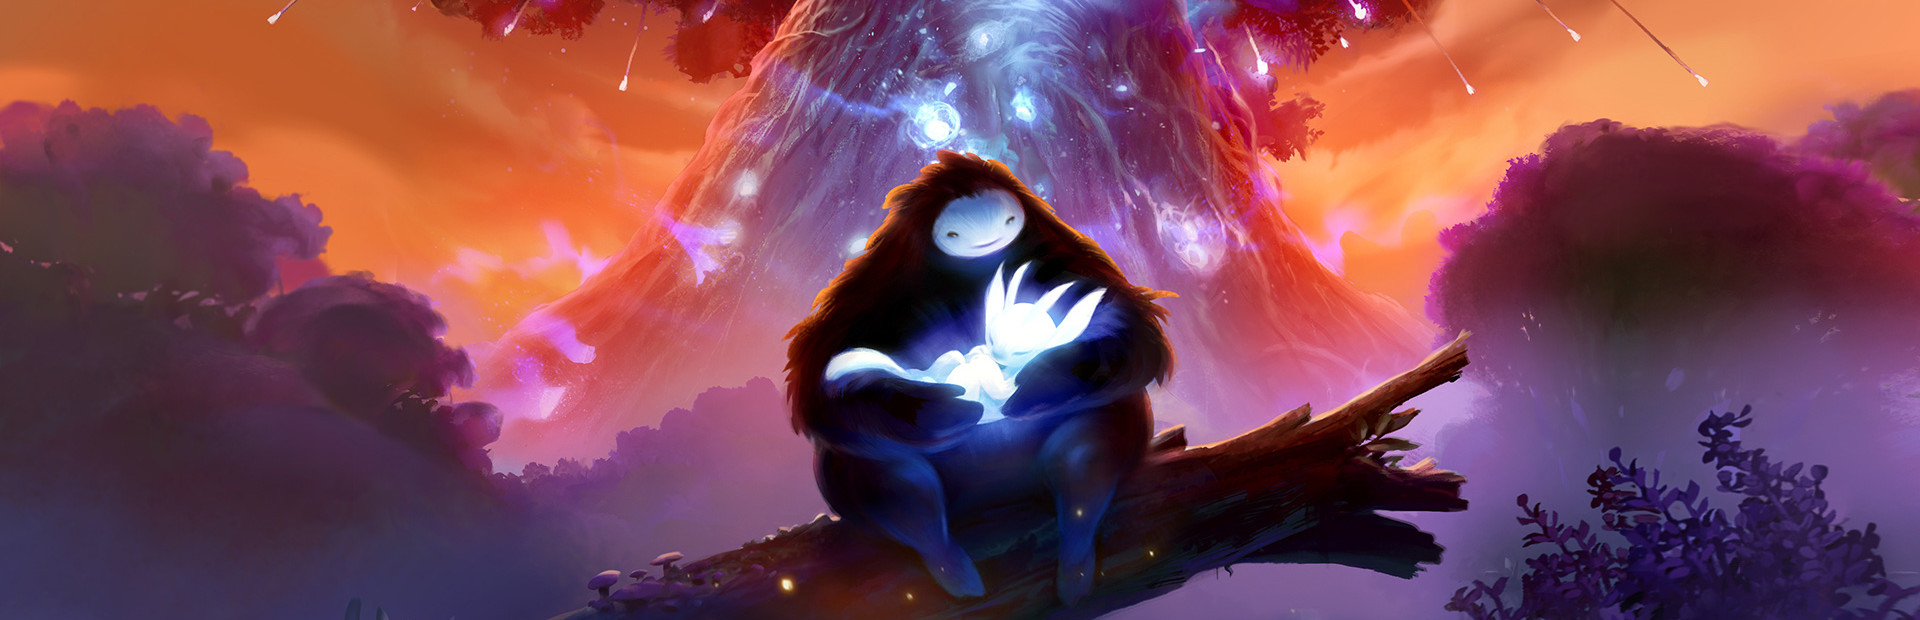 Ori and the Blind Forest: Definitive Edition cover image